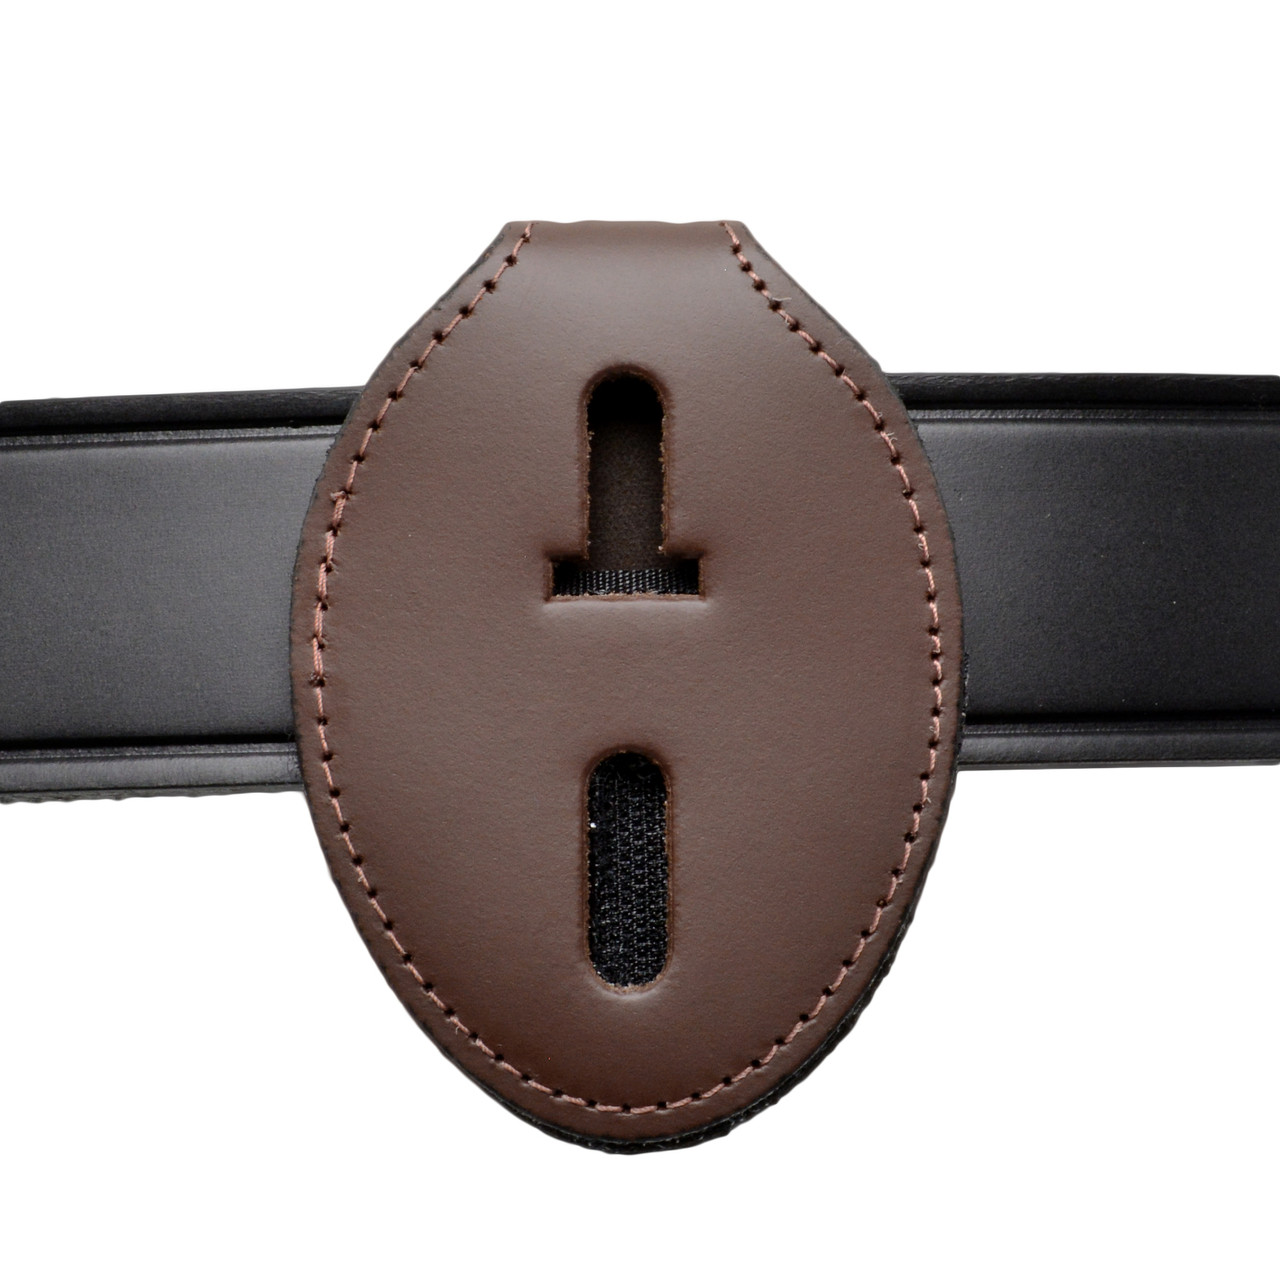  Badge Shield Holder with Leather Wrapped Heavy Duty